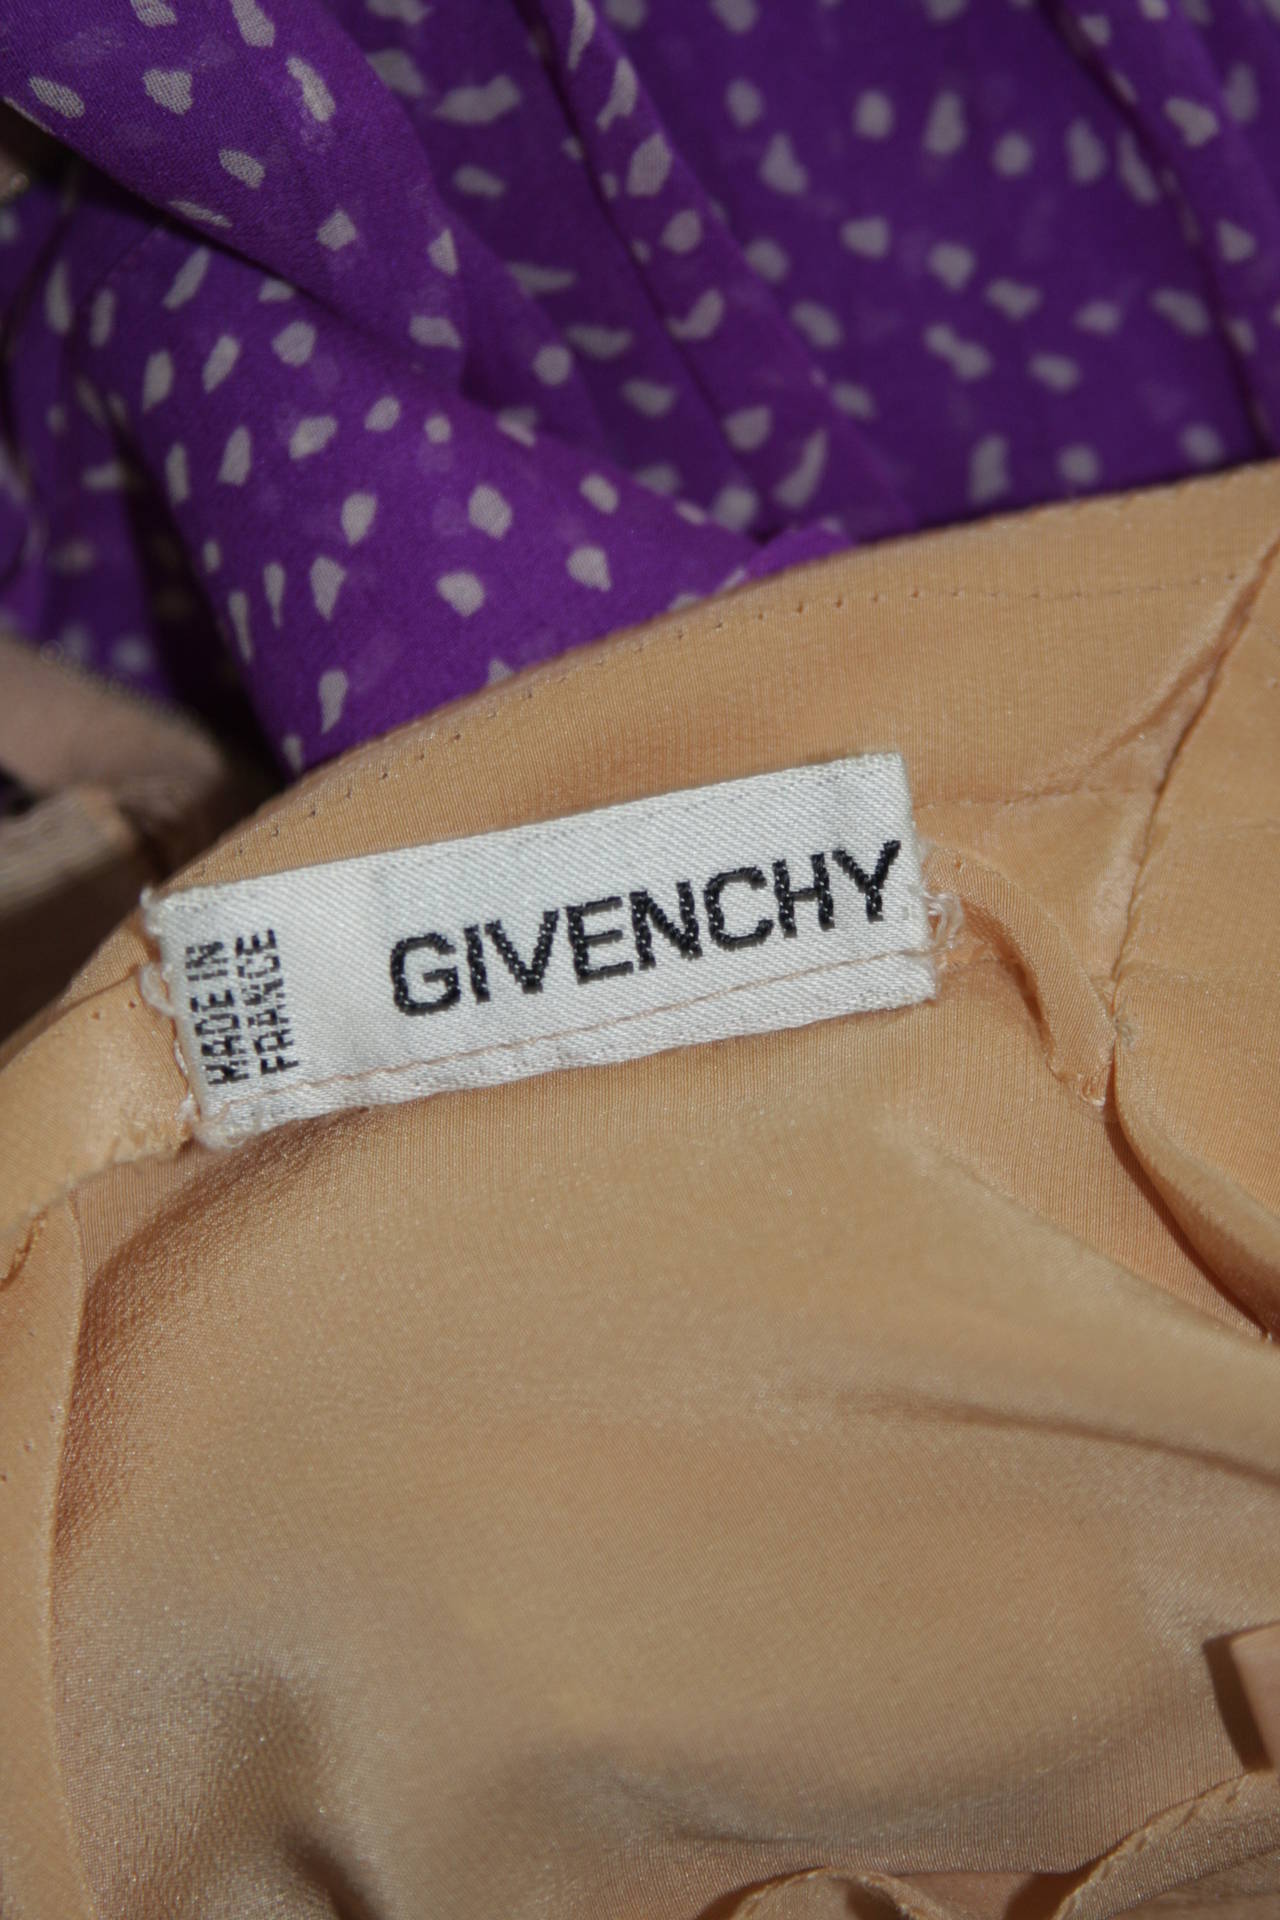 Givenchy Couture Purple Silk Chiffon Dress with Wrap Collar and Belt Size Small For Sale 3